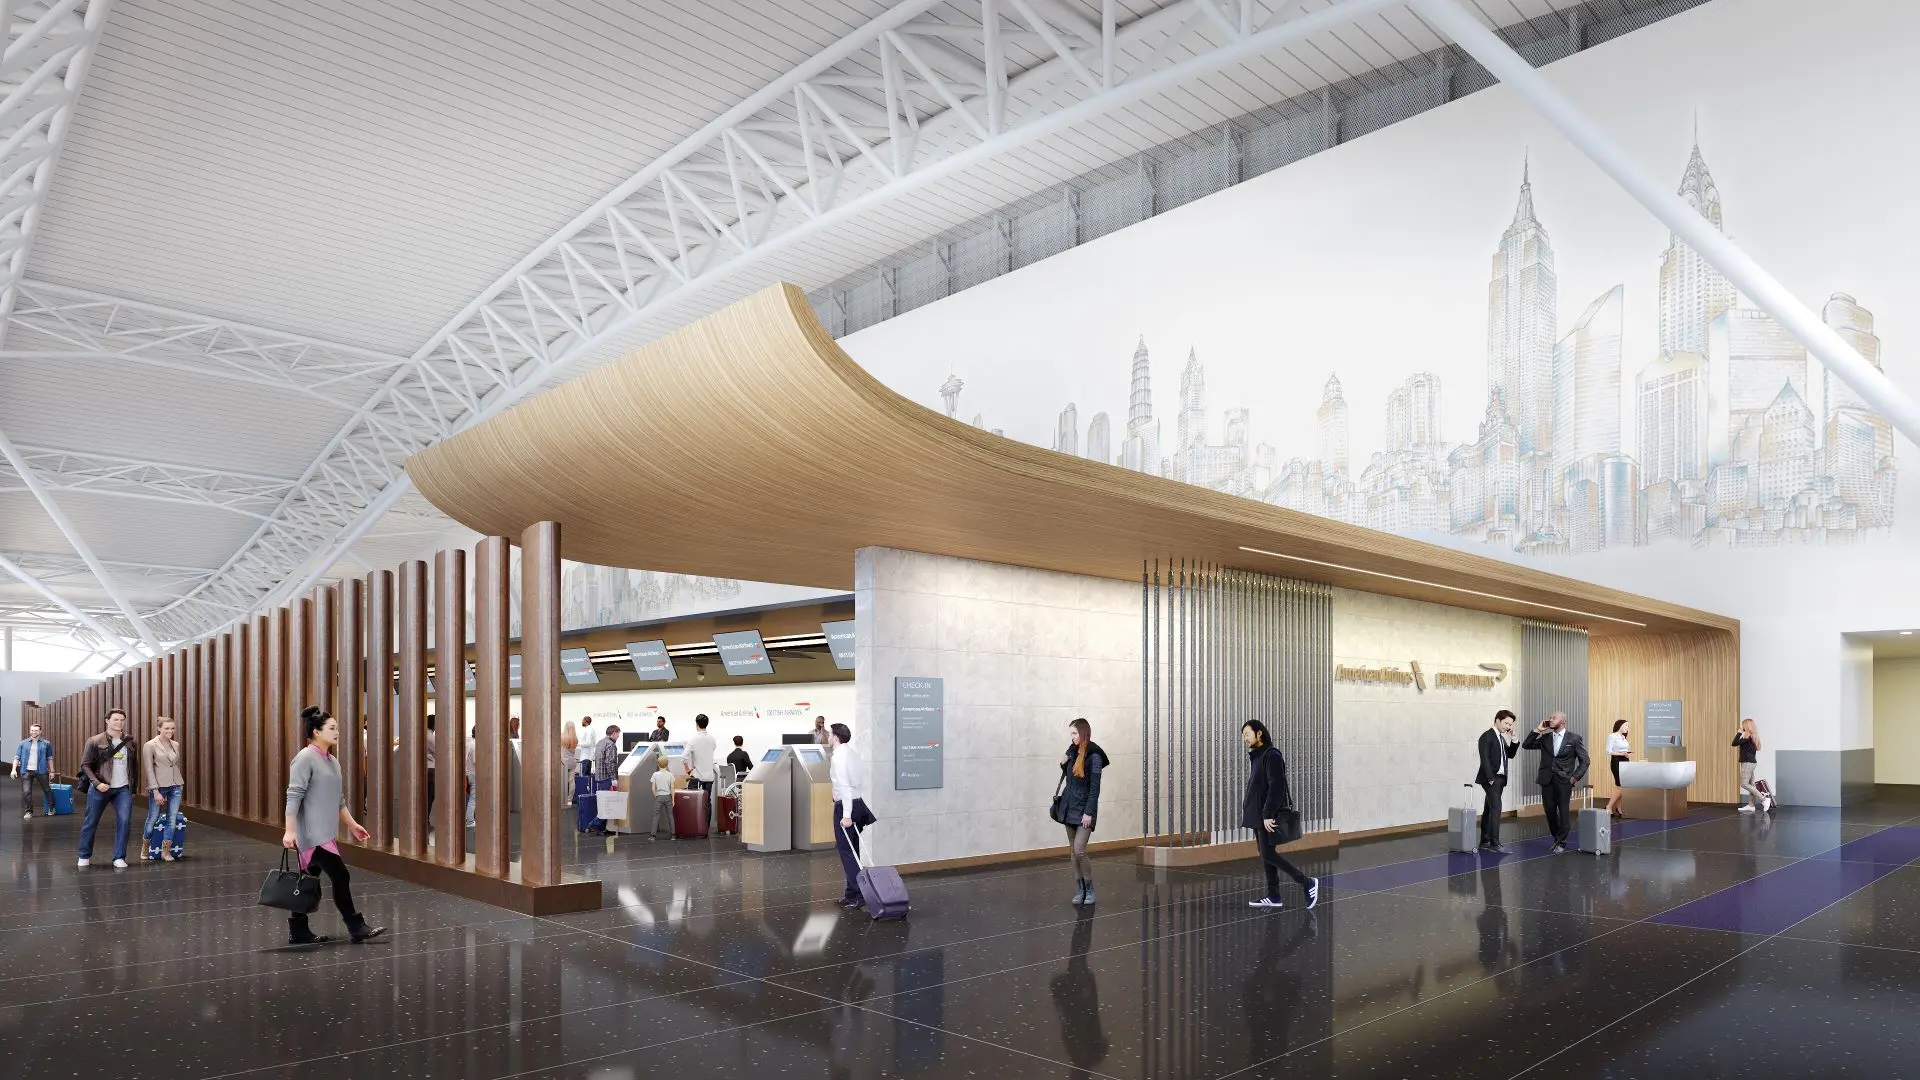 Airlines News - British Airways moves to JFK Terminal 8 on November 17th